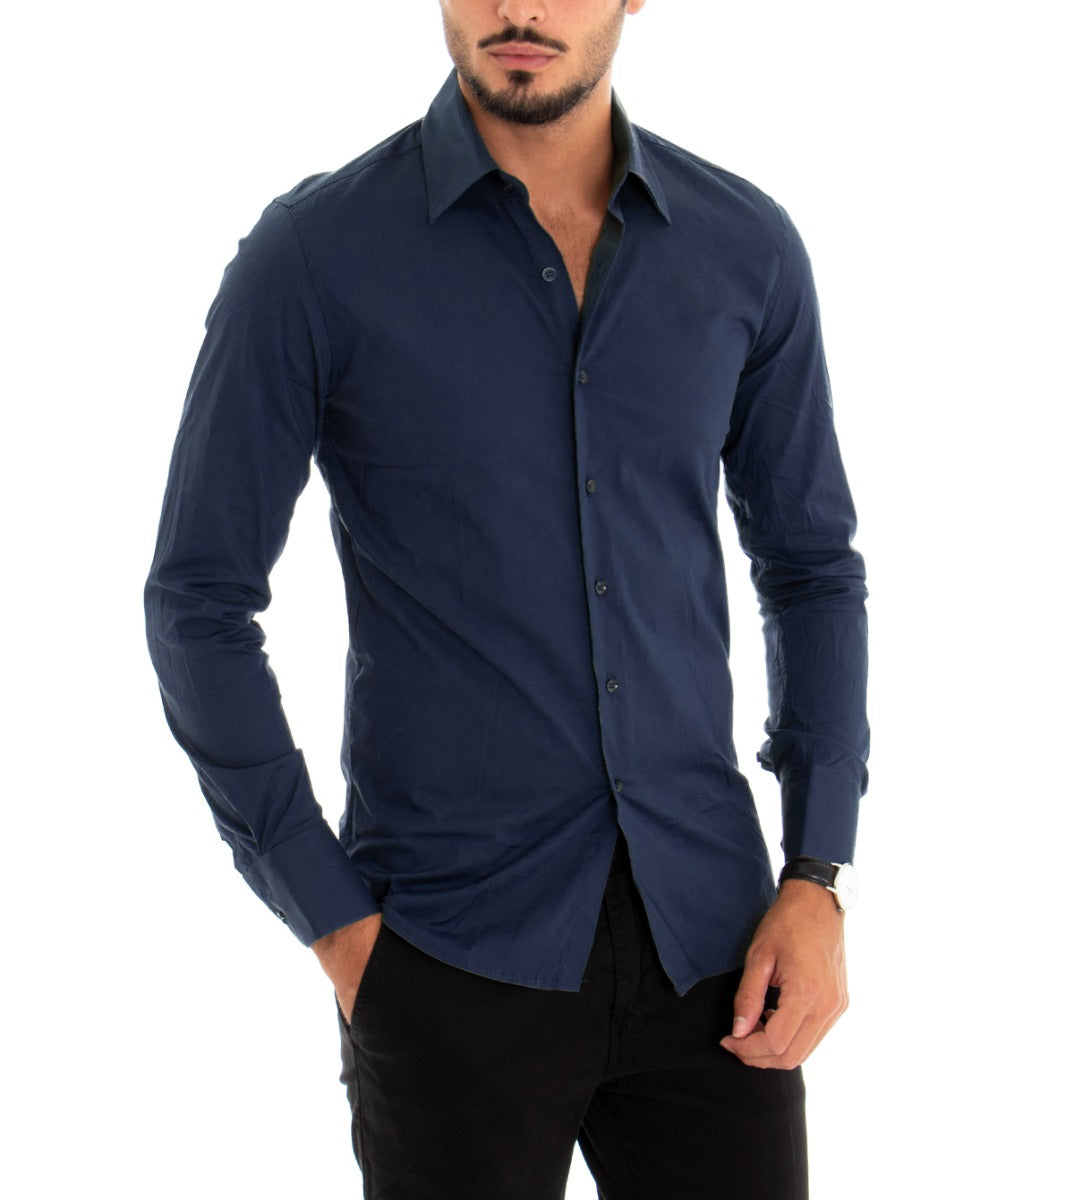 Men's Shirt With Collar Long Sleeve Slim Fit Basic Casual Cotton Blue GIOSAL-C1809A